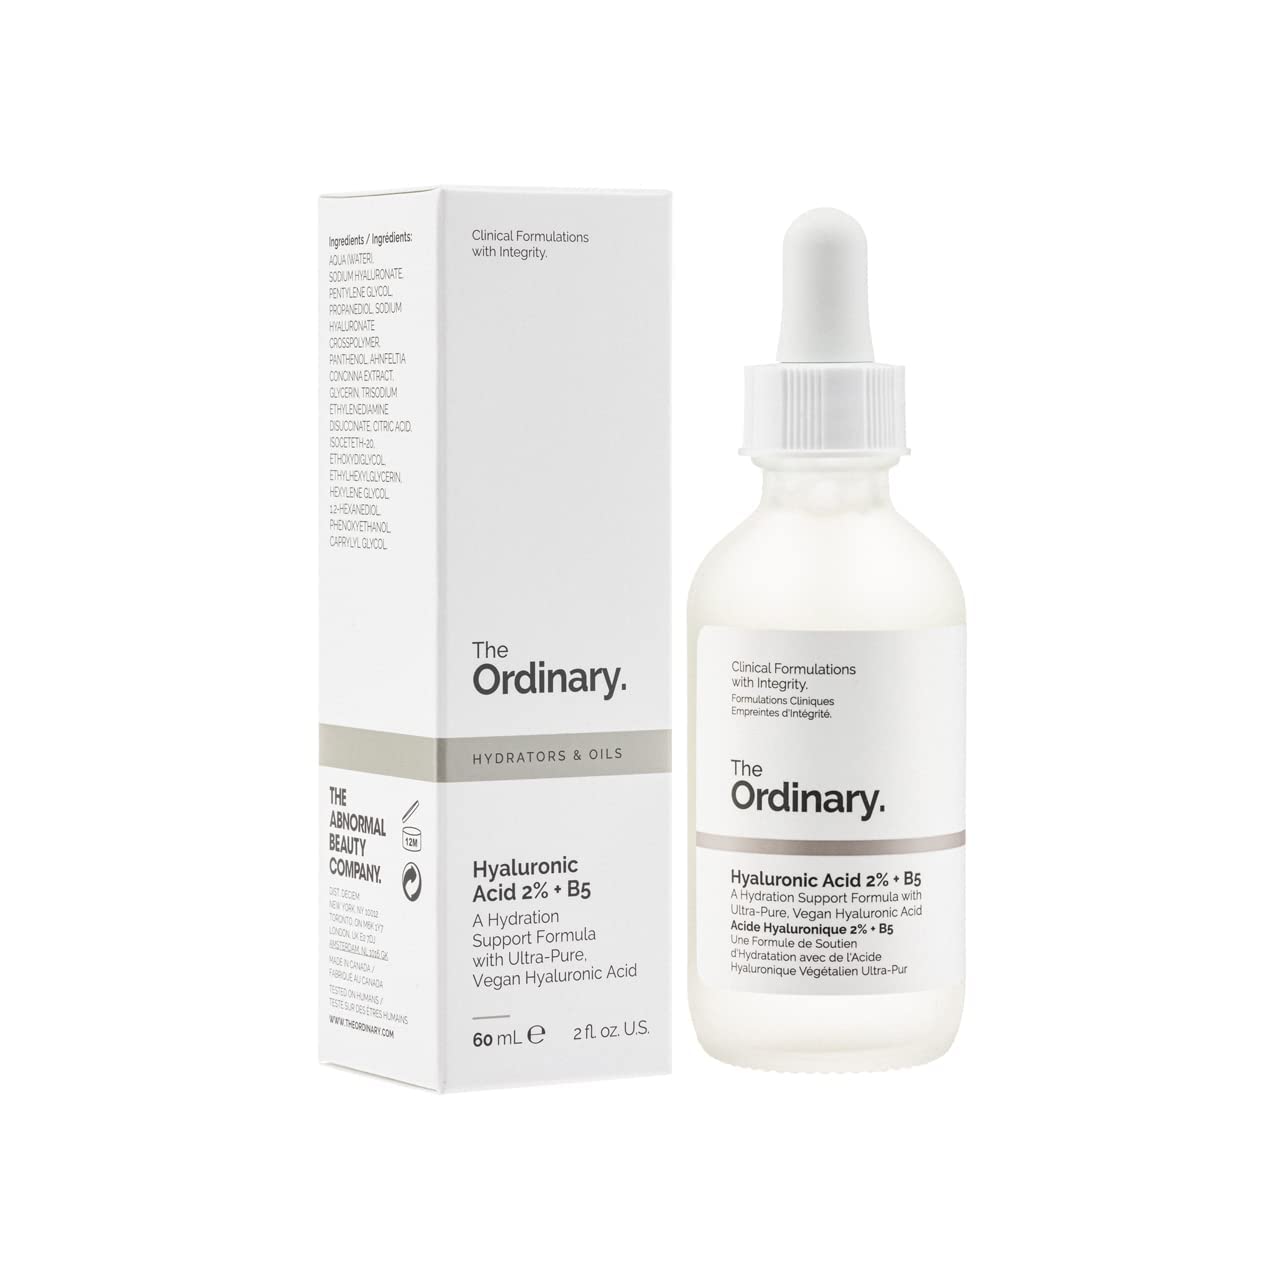  The Ordinary Hyaluronic Acid